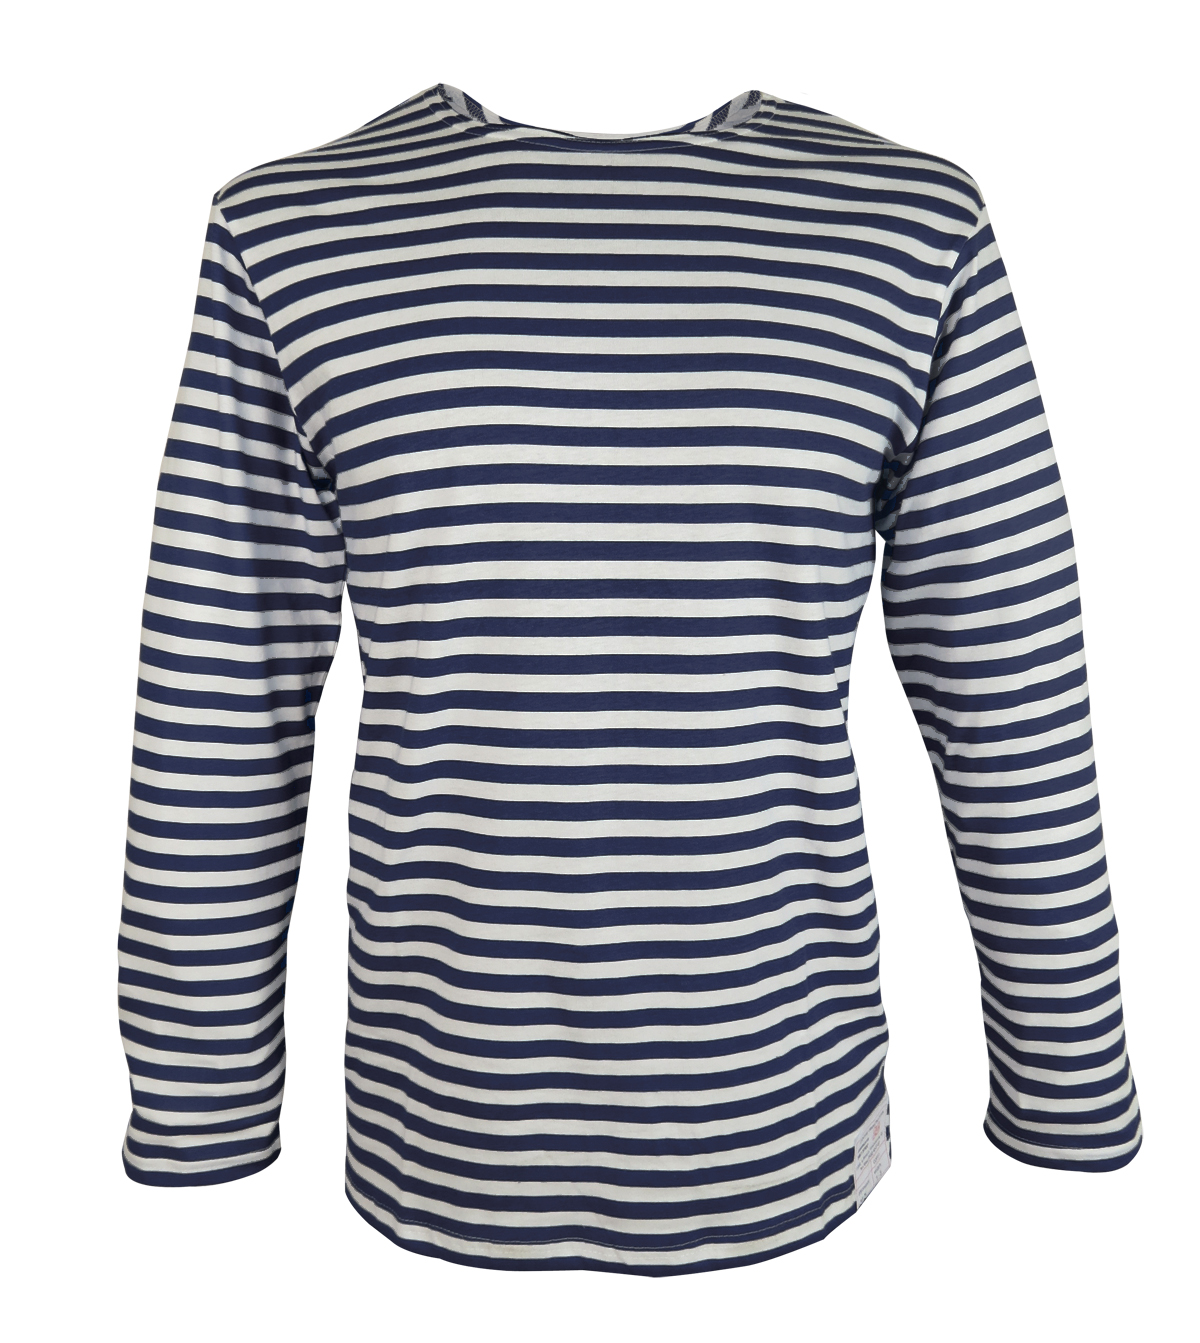 Long Sleeve Russian Striped Top by Russian Army